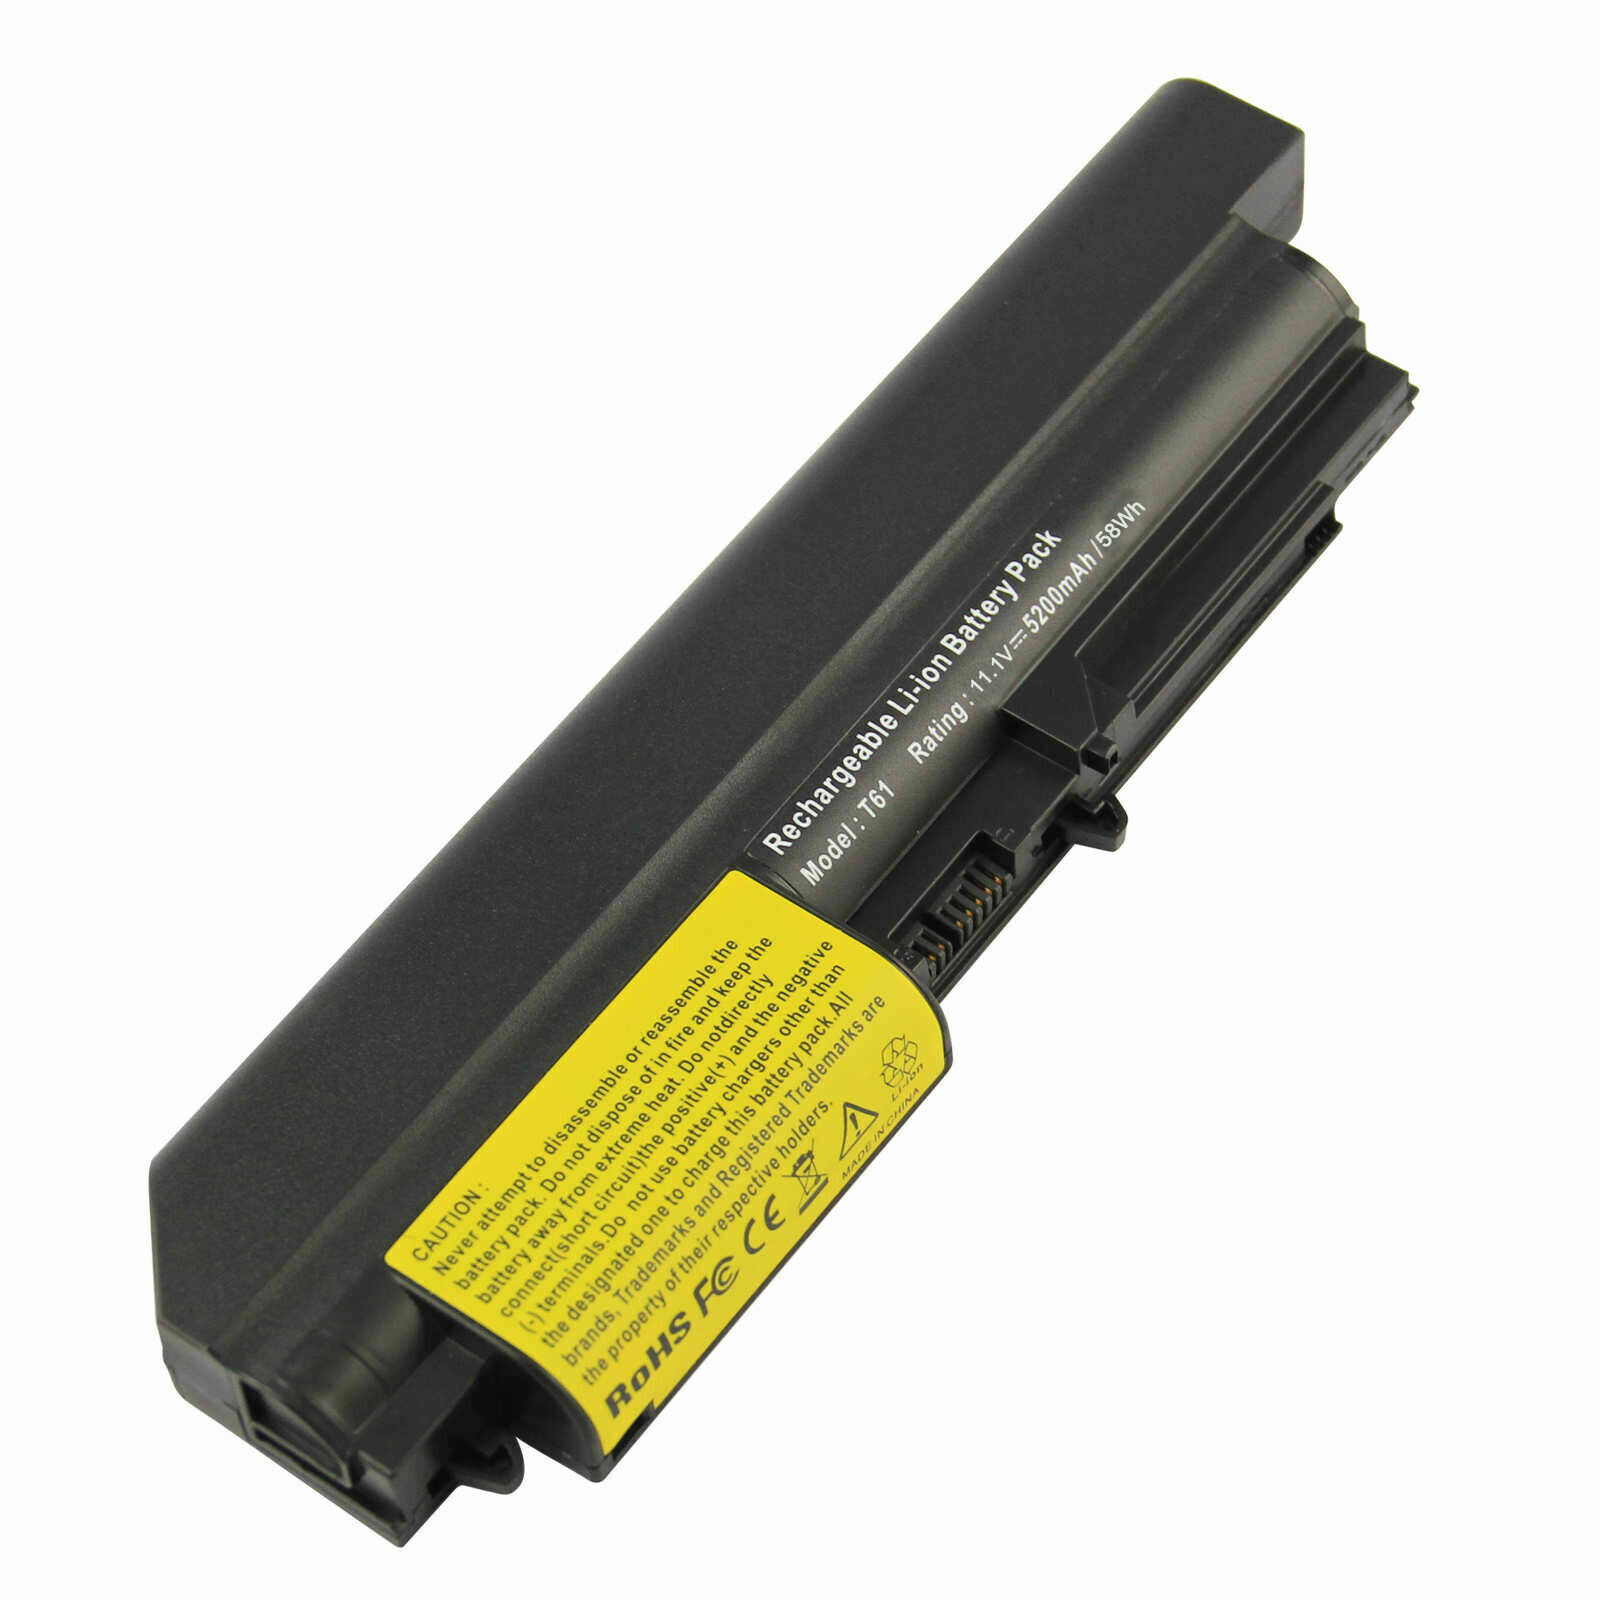 41U3198 Battery for Lenovo ThinkPad R61 T61 T400 R400 Series 14.1" Widescreen - image 1 of 5